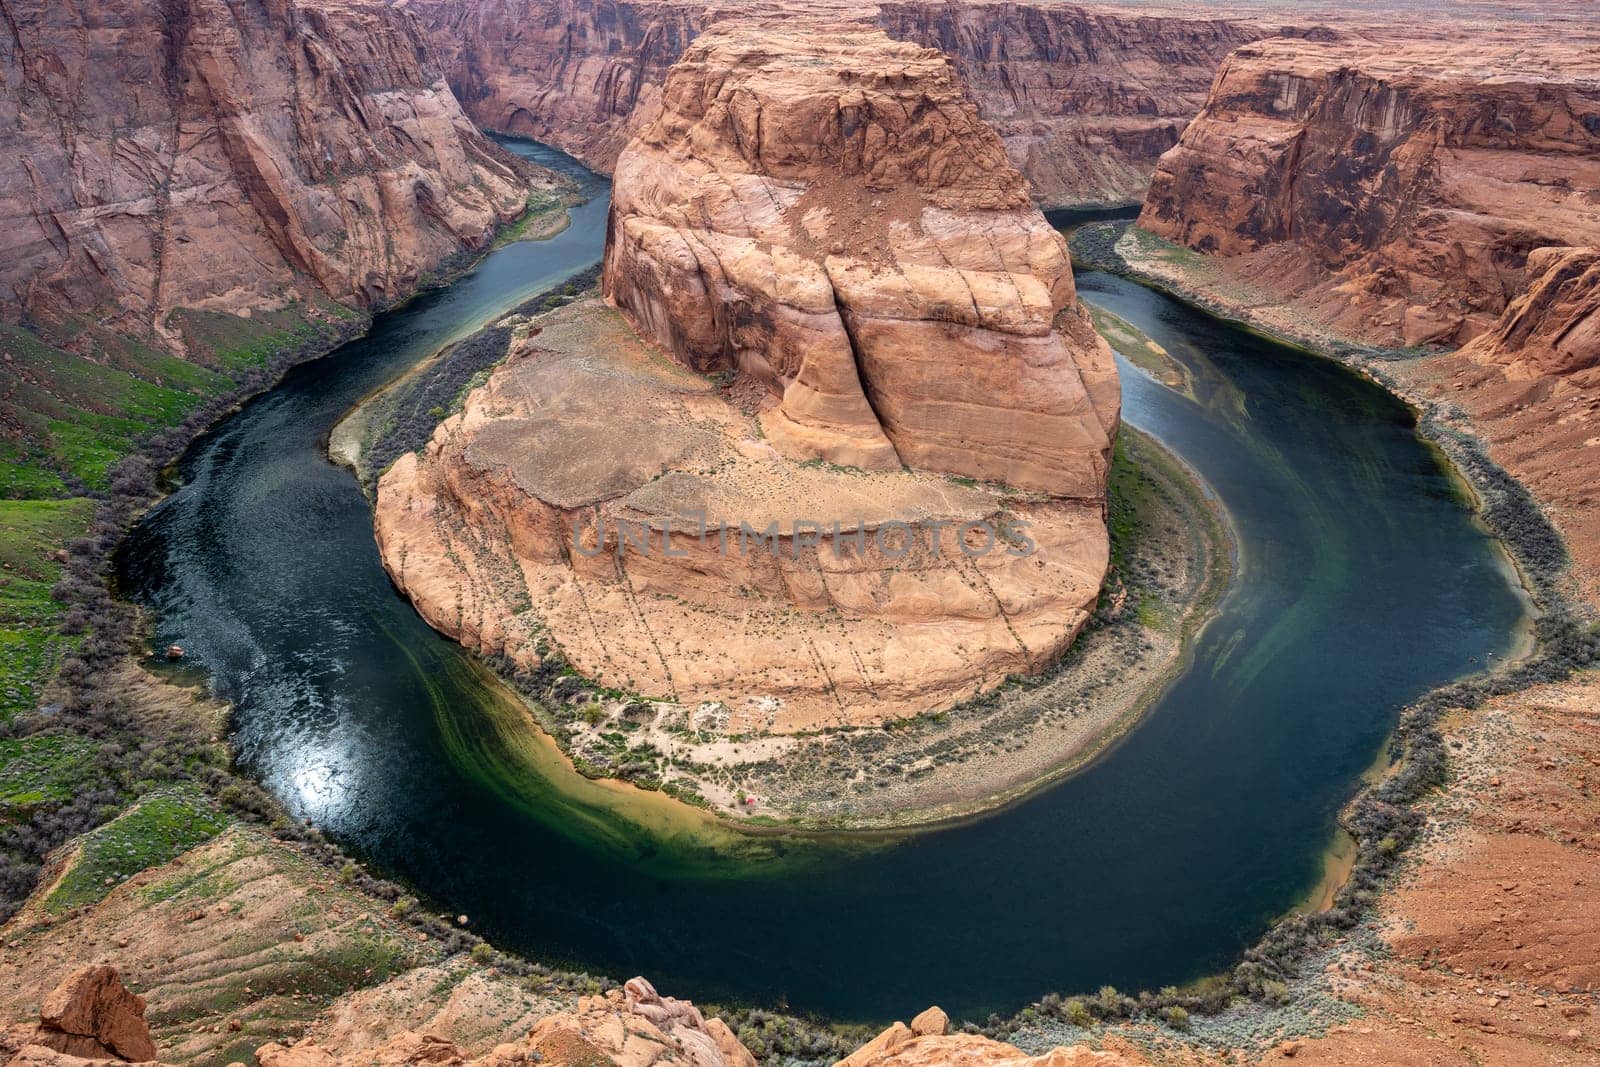 The famous Horseshoe Bend of the Colorado river in northern Arizona